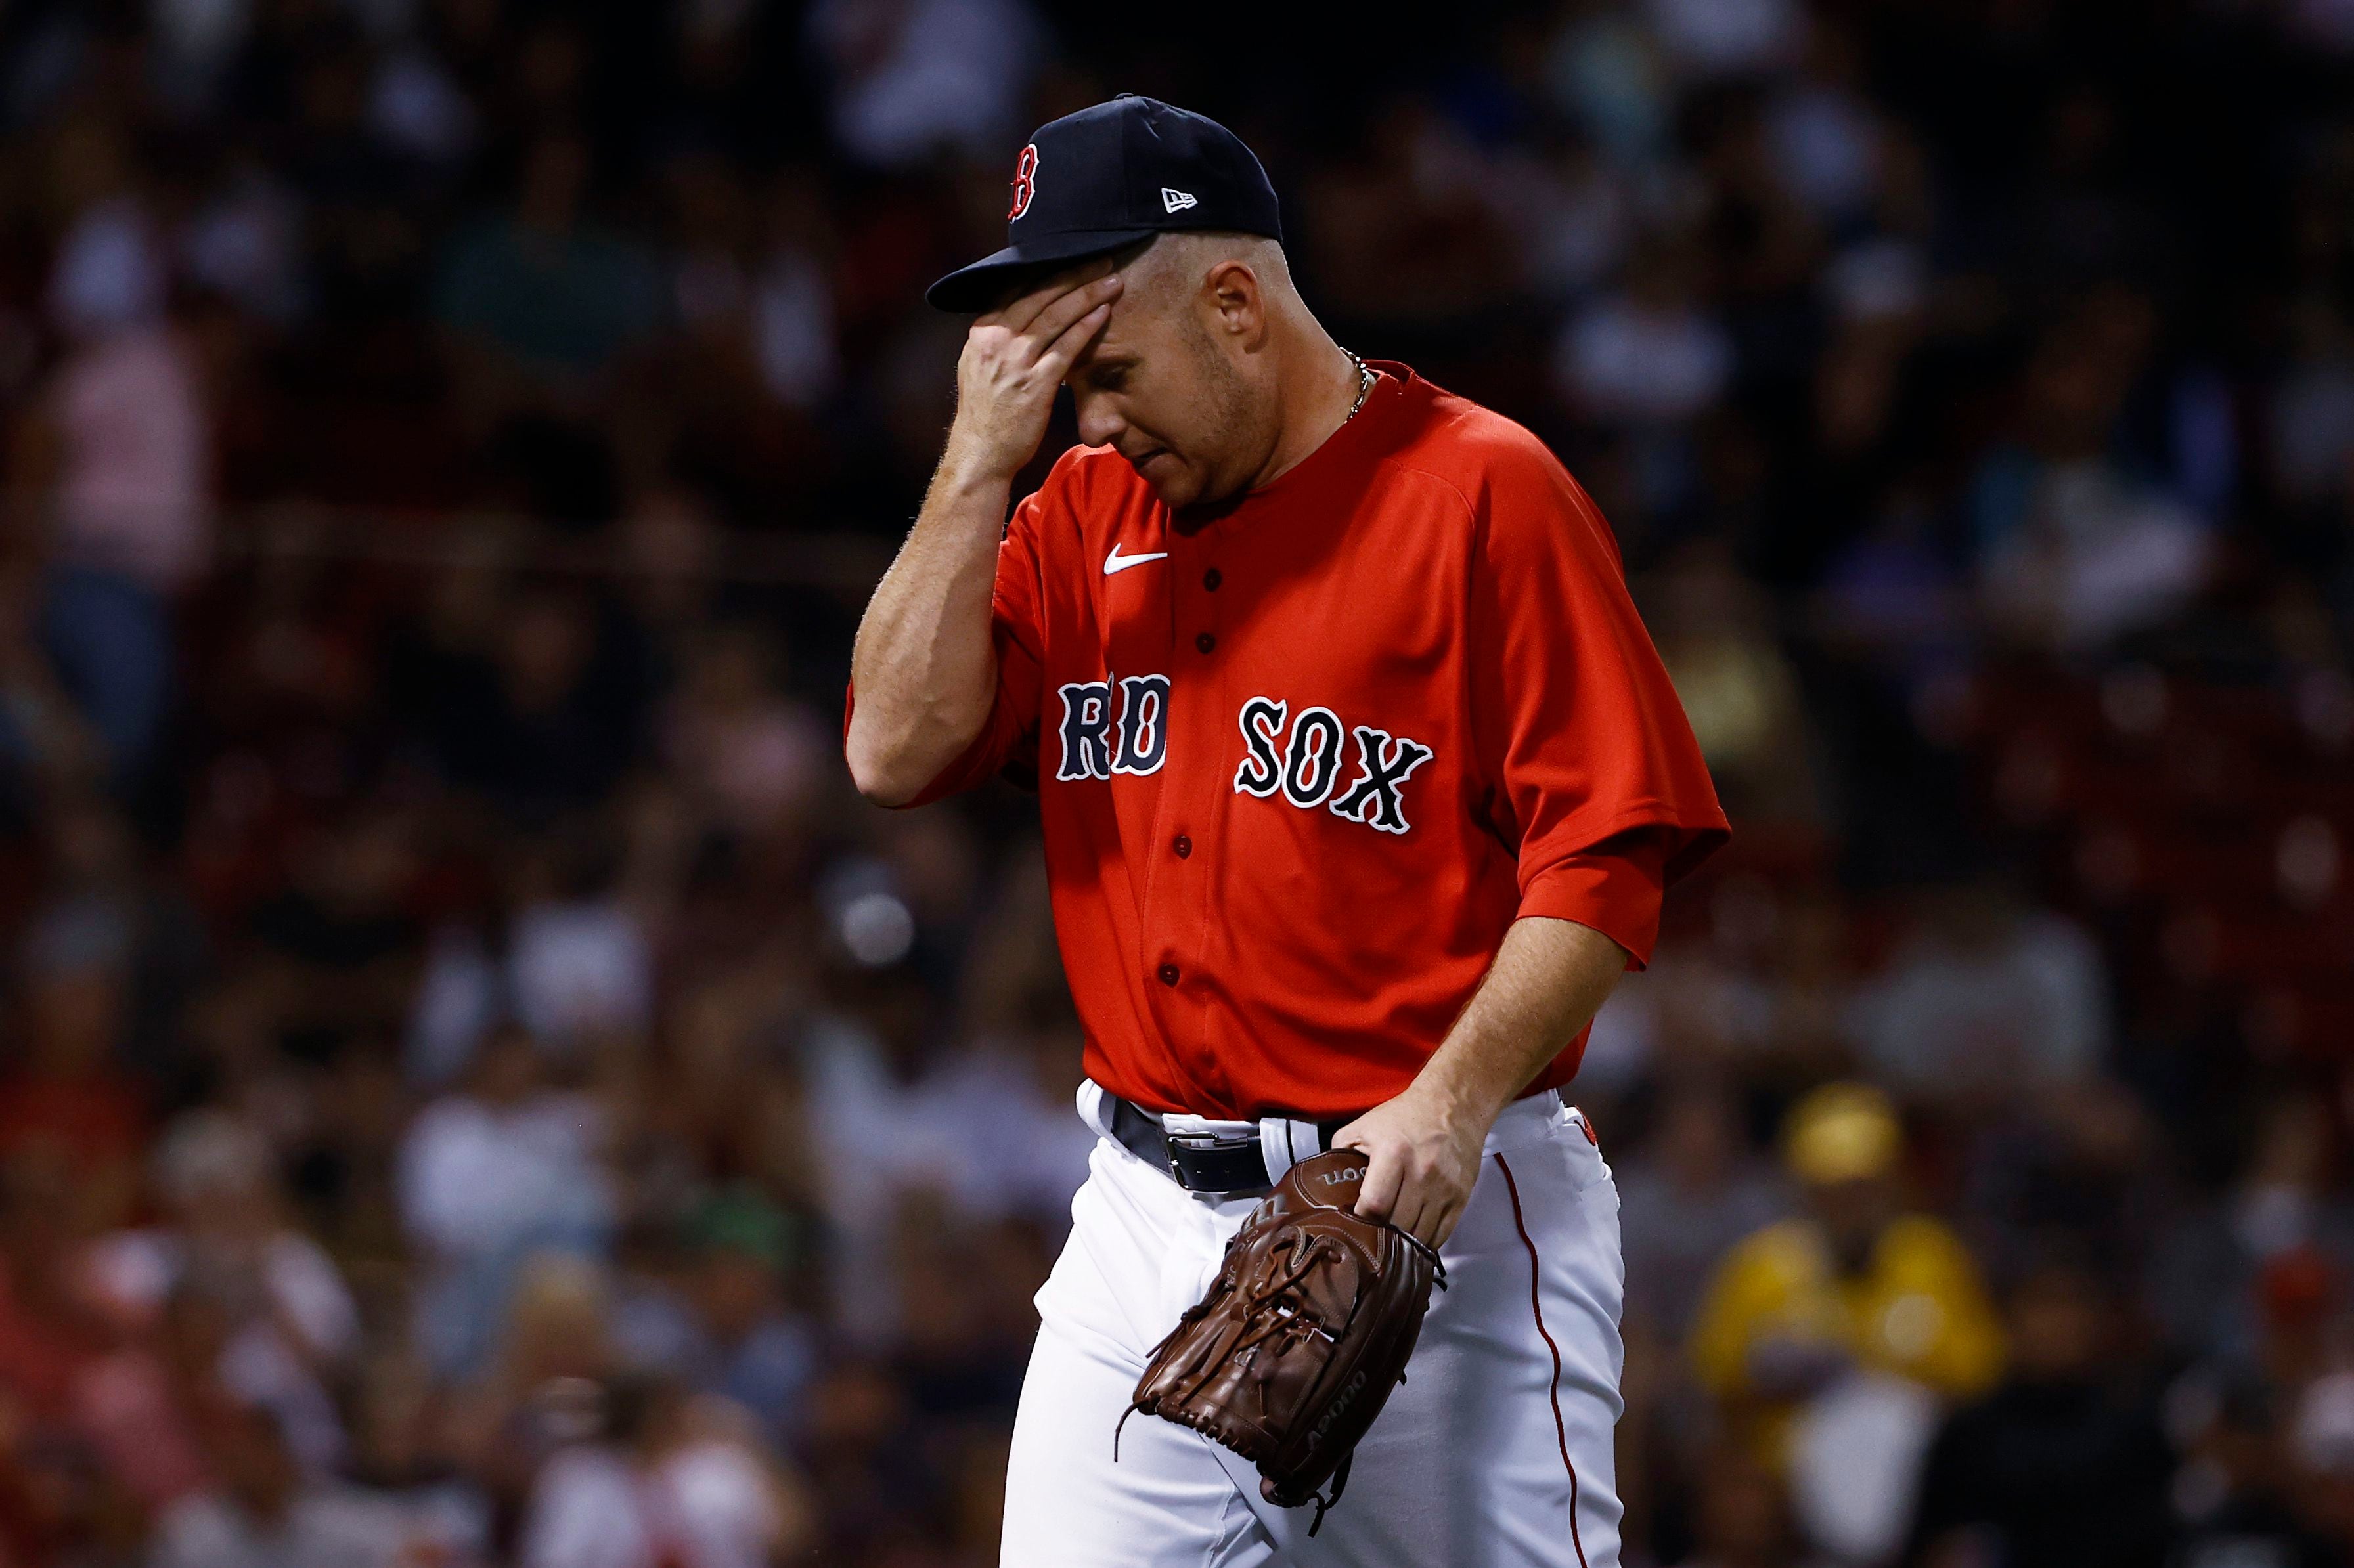 Red Sox Kike Hernandez tests positive for COVID-19, manager says